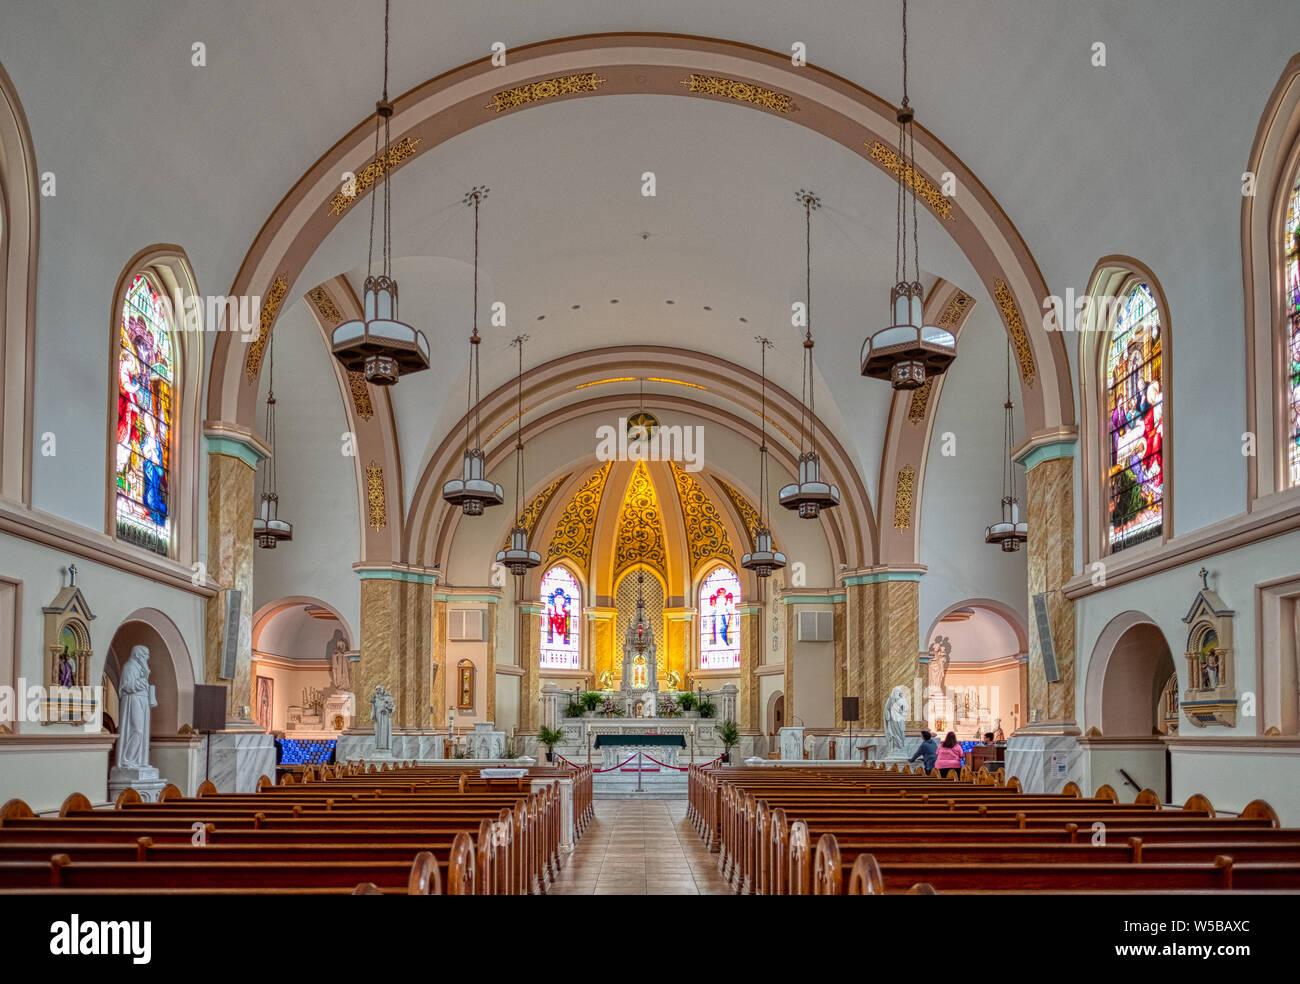 The sanctuary of Our Lady Star of the Sea Catholic Church in Cape May, New Jersey USA Stock Photo